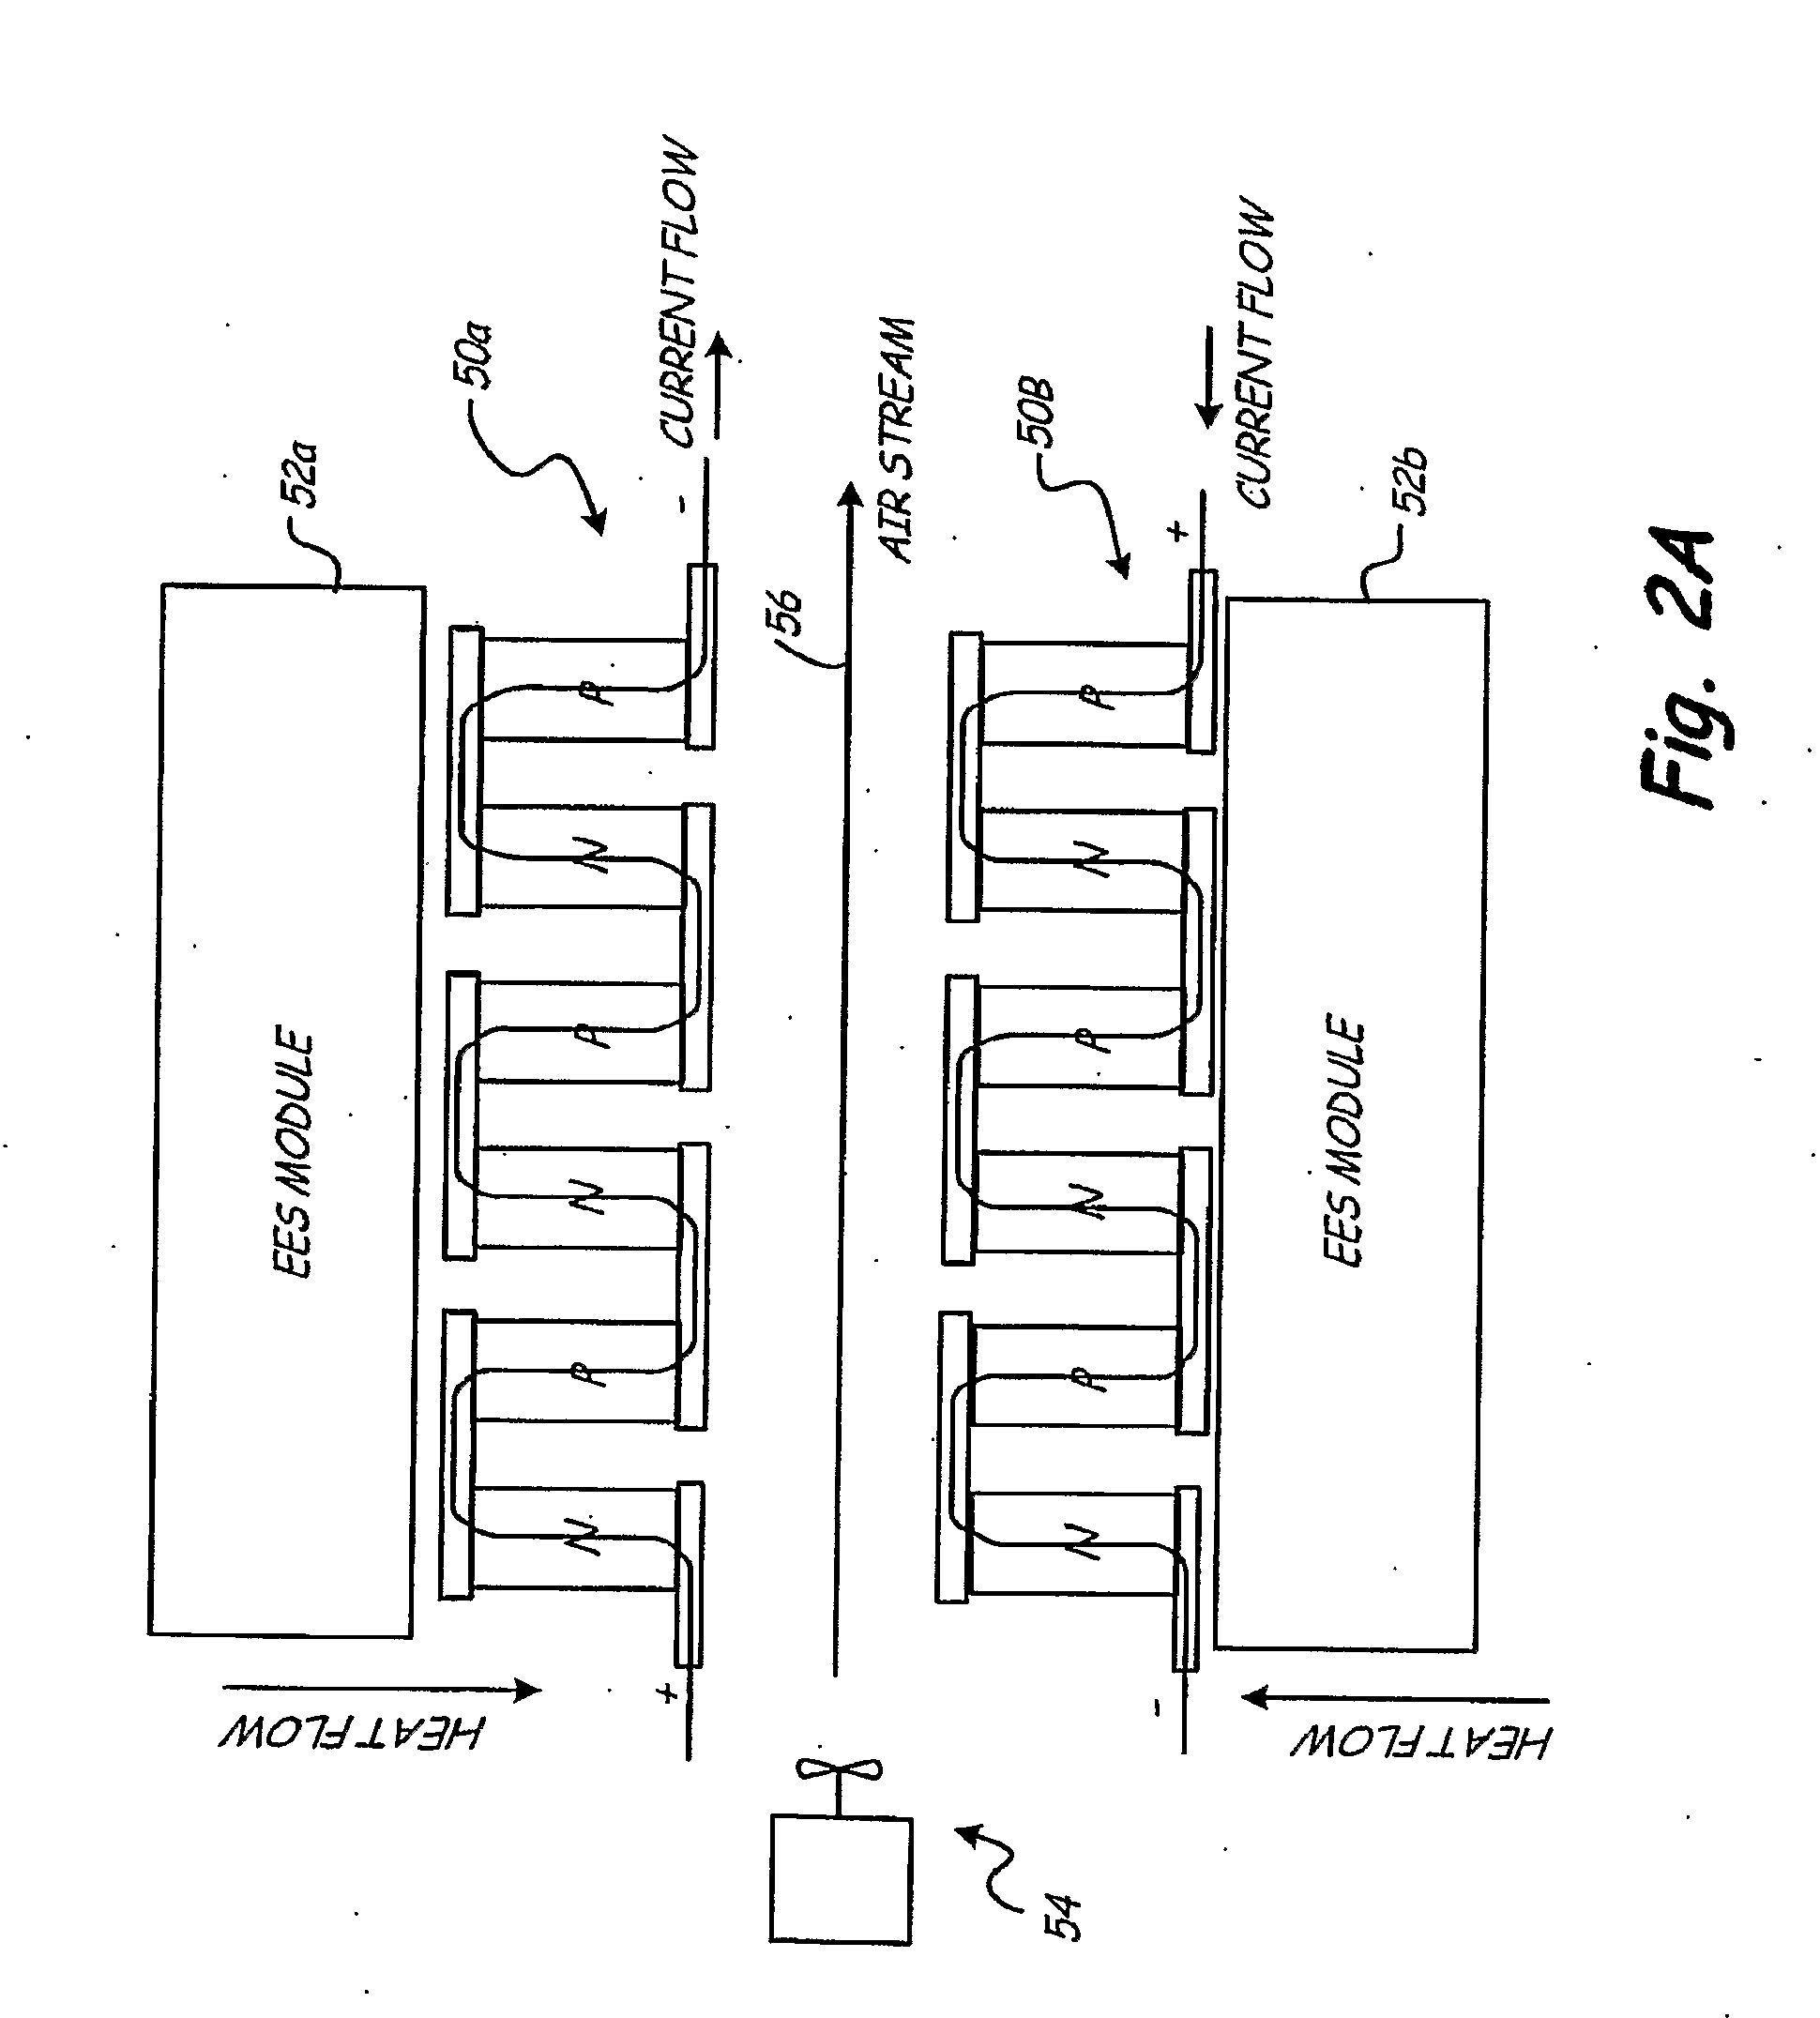 Thermoelectric thermal management system for the energy storage system in a regenerative elevator